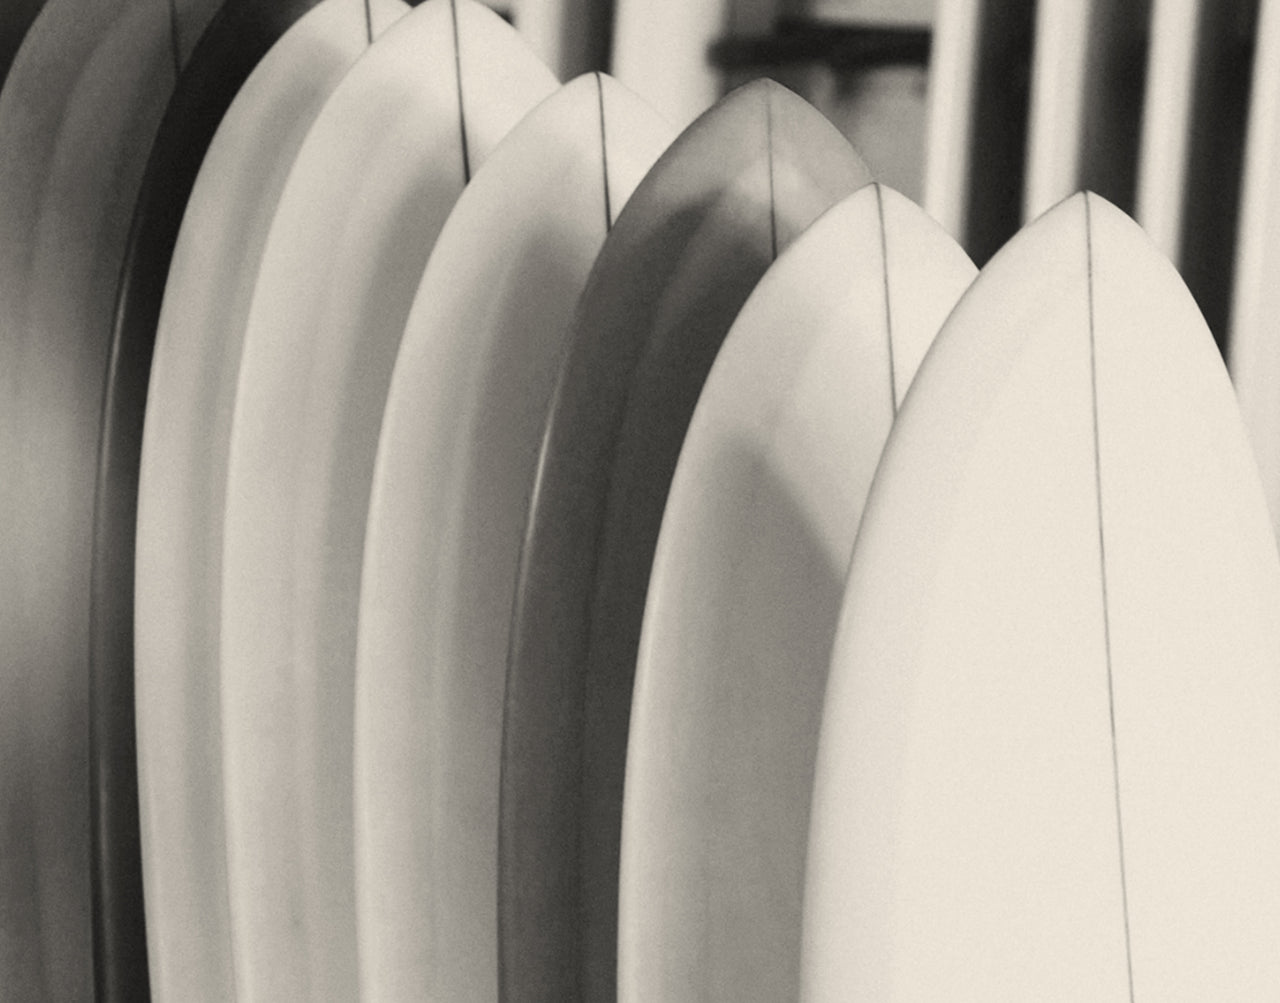 All Surfboards